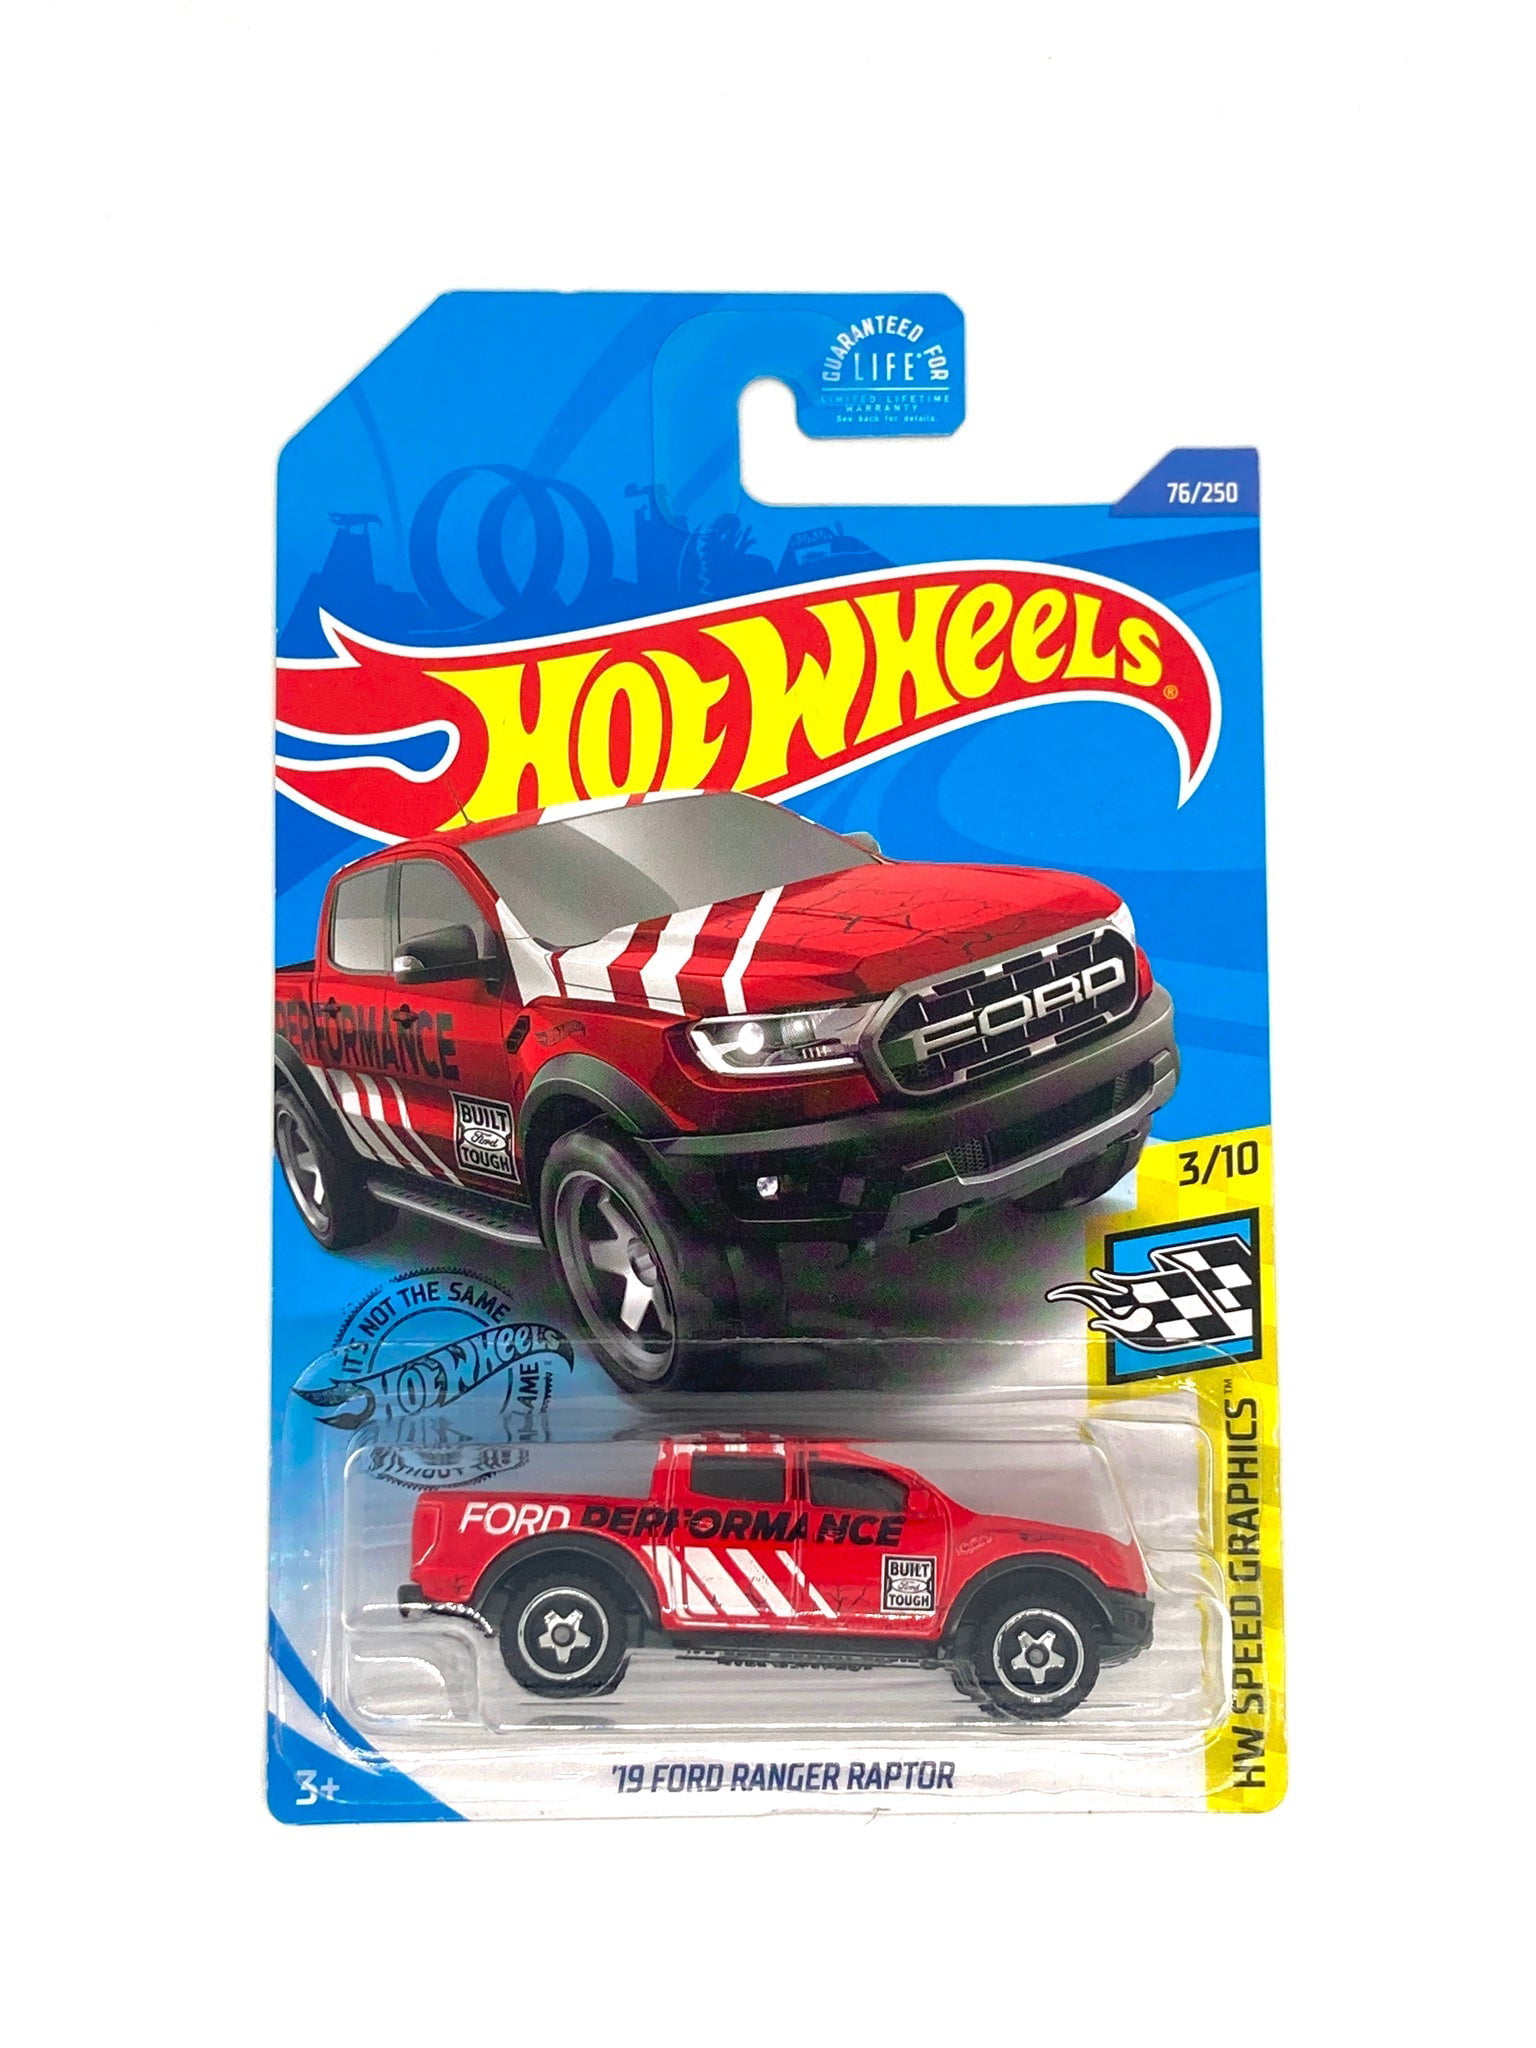 Details about   2020 Hot Wheels '19 FORD RANGER RAPTOR 76/250 HW SPEED GRAPHICS 3/10 RED 